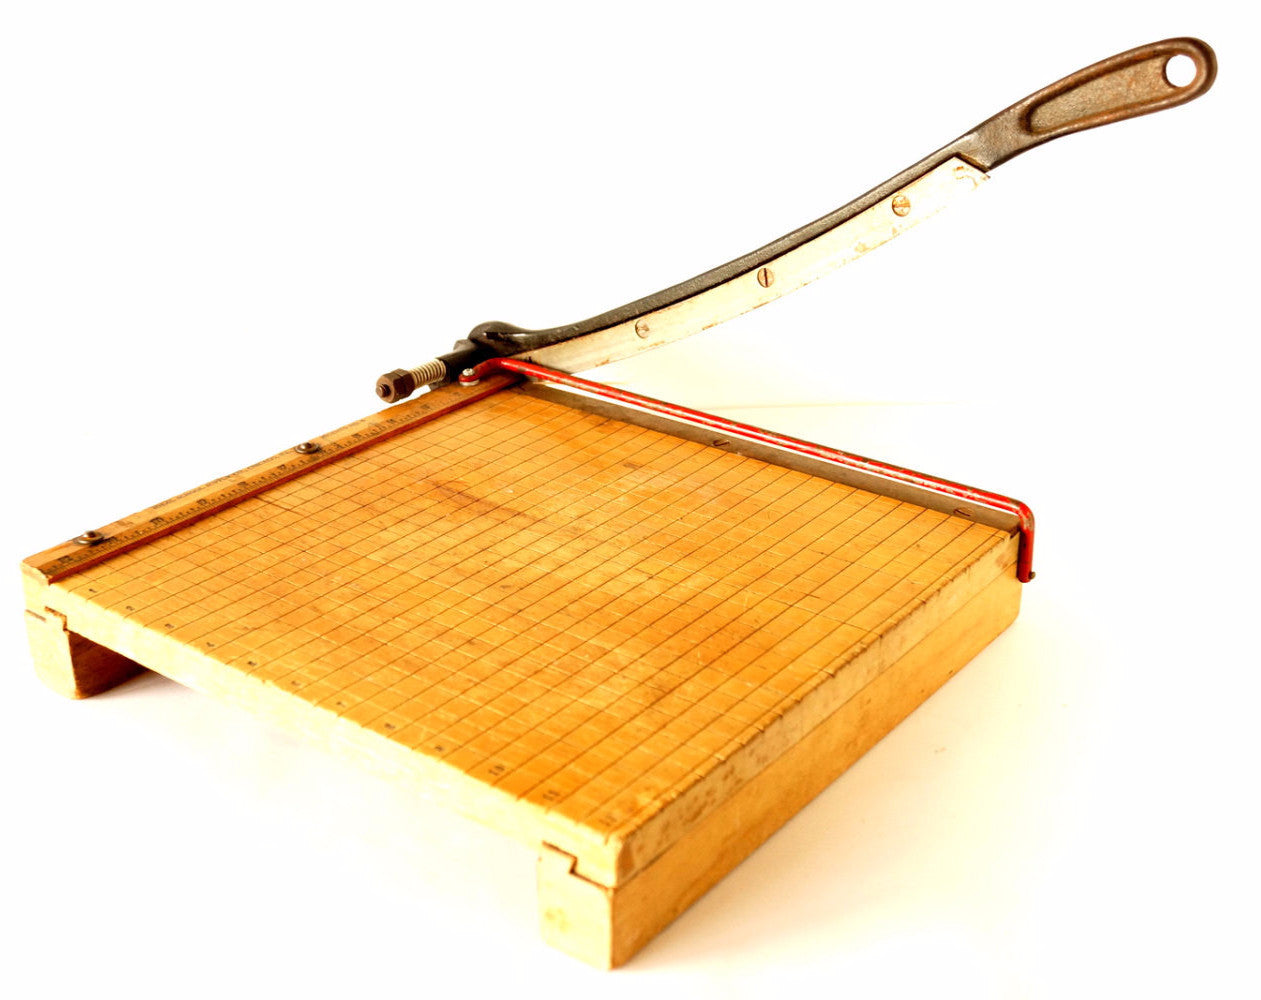 Vintage Paper Cutter Ingento No. 4 with Large Blade (c.1950s) –